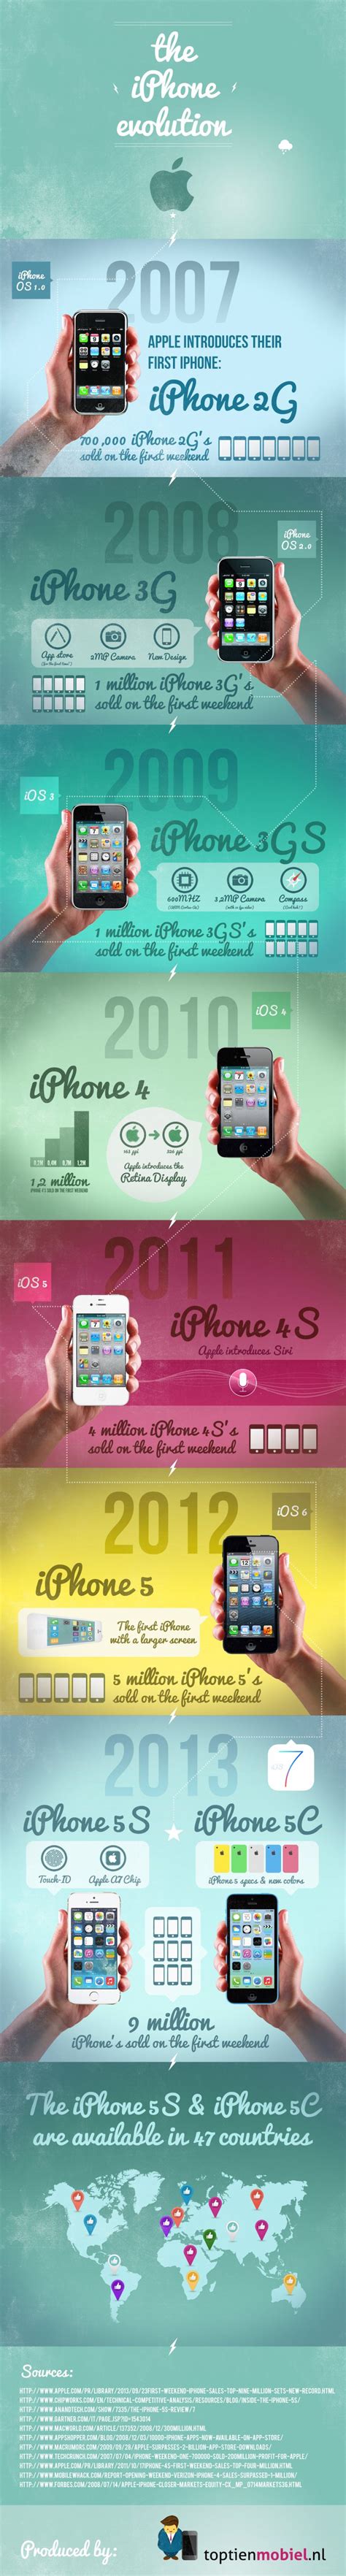 Infographic Shows How The Iphone Has Grown Over The Years